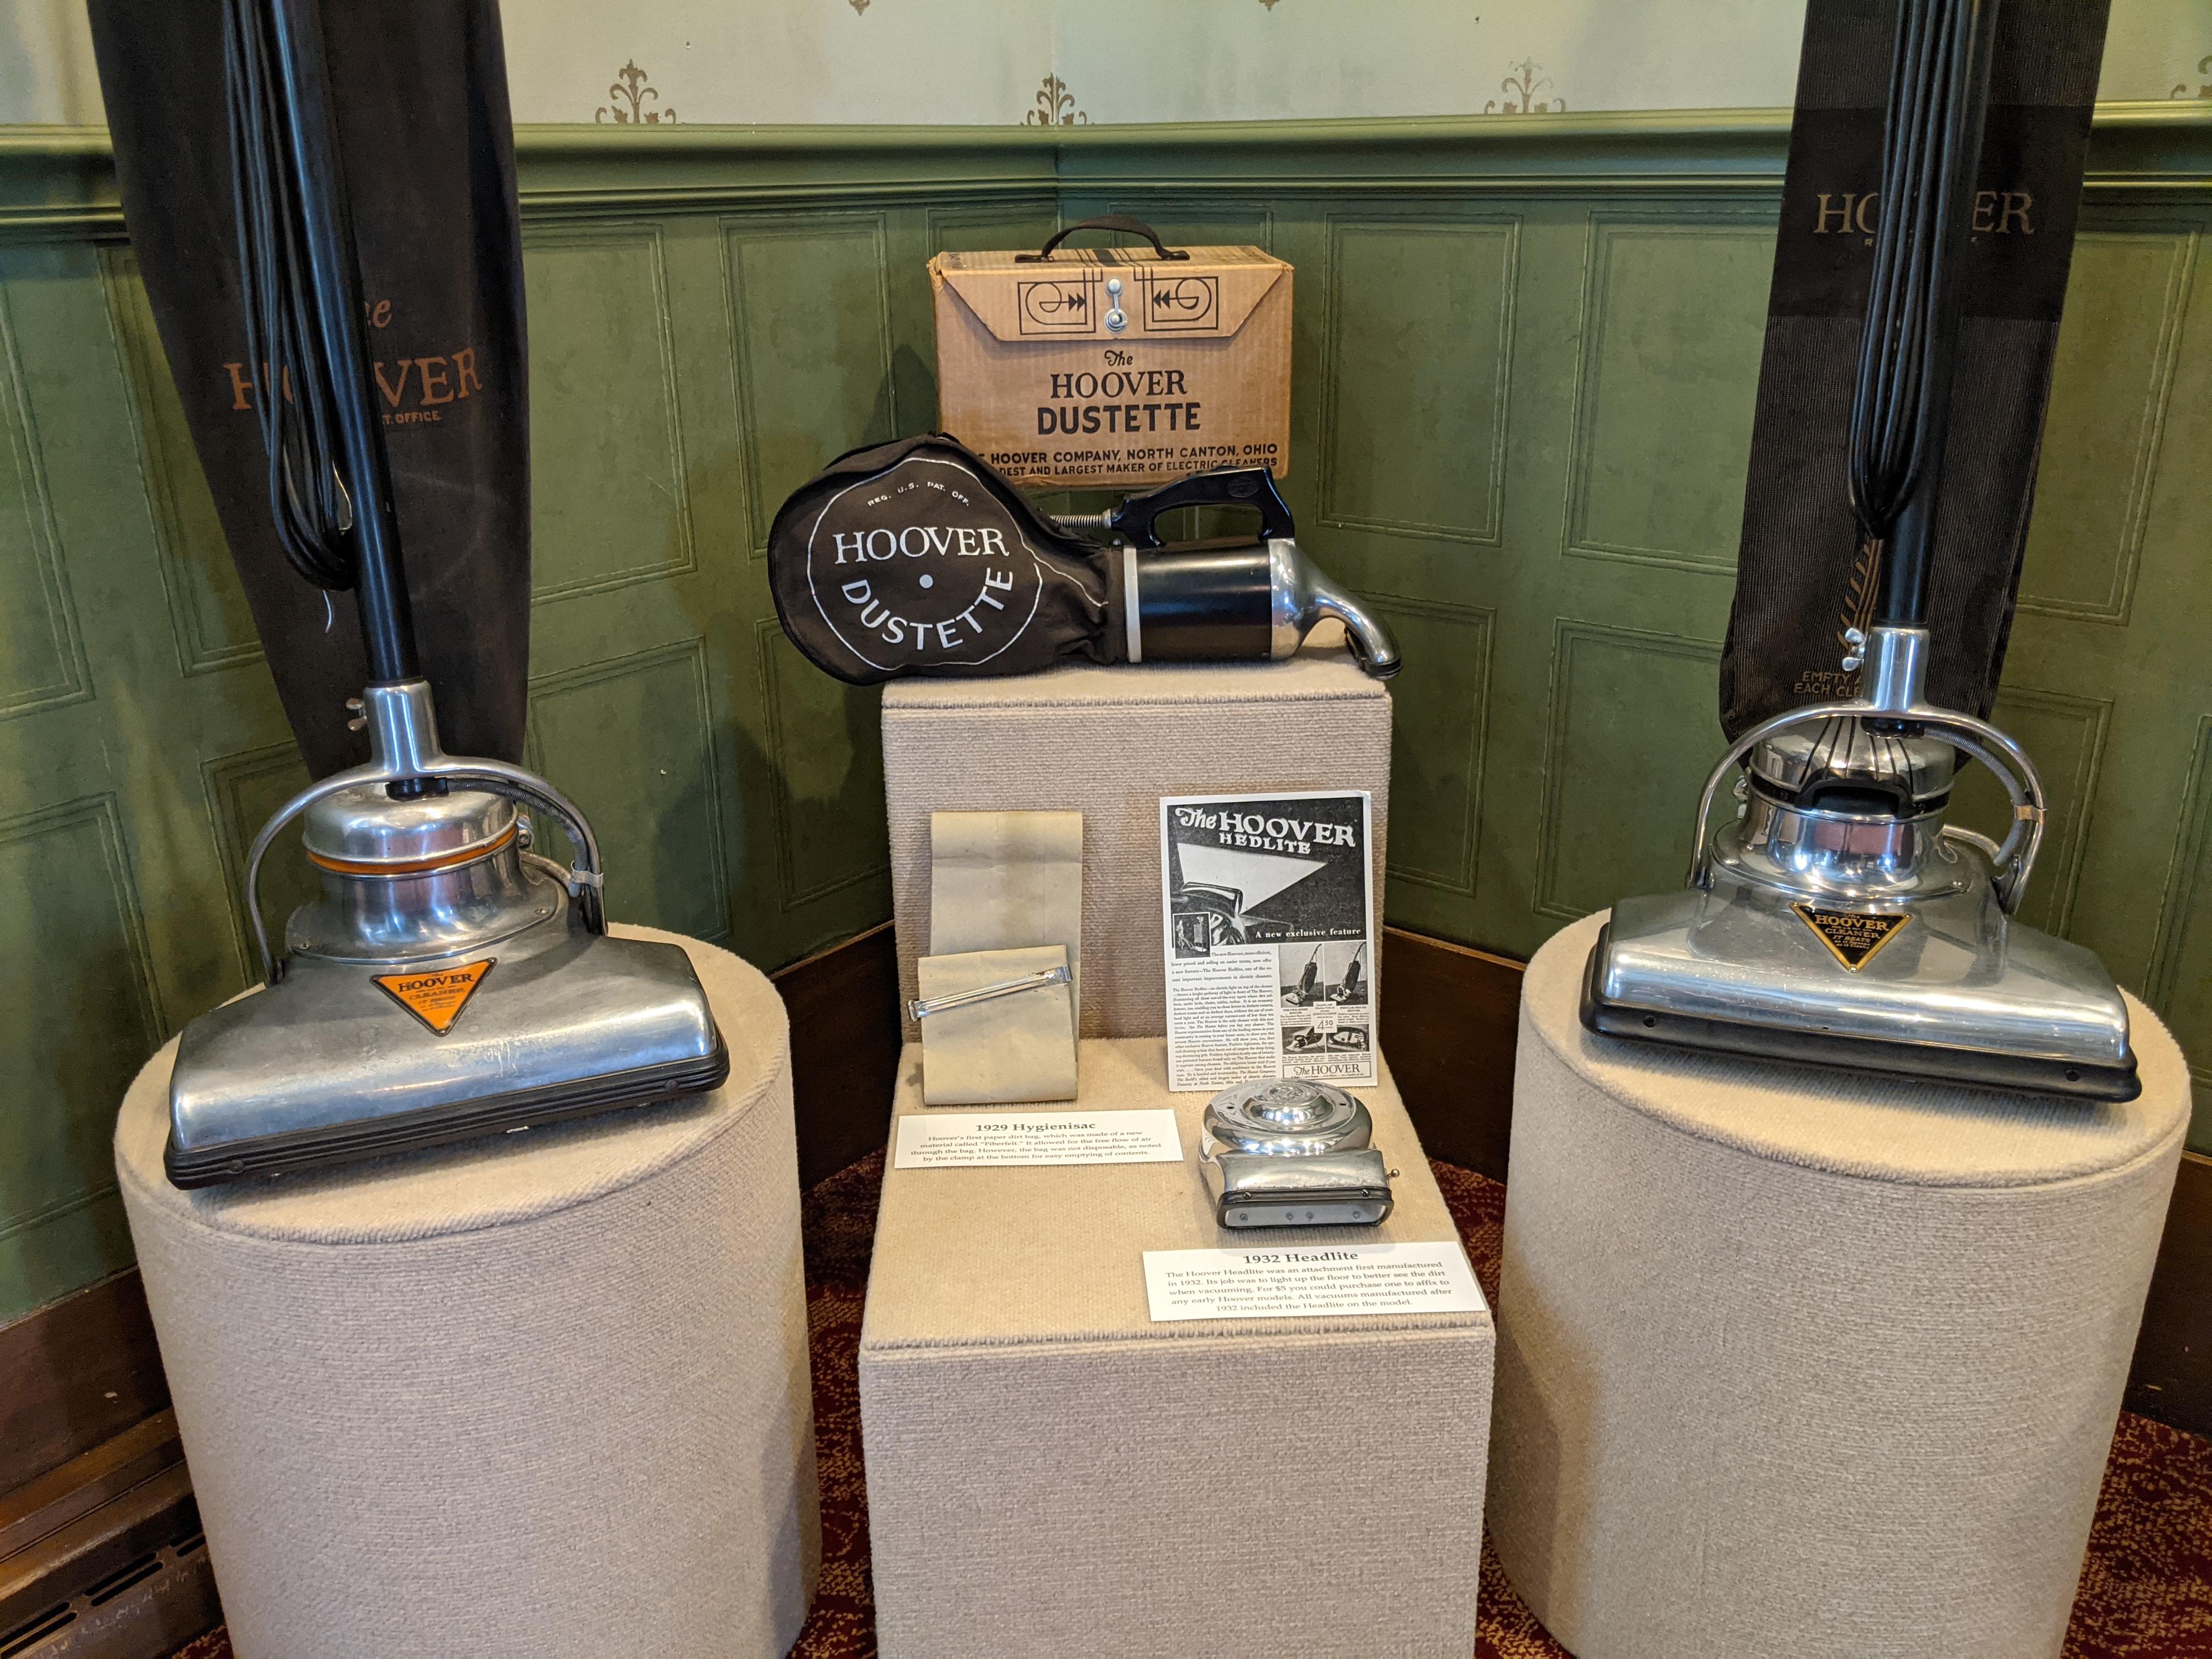 Antique vaccum display at the Hoover Historical Center